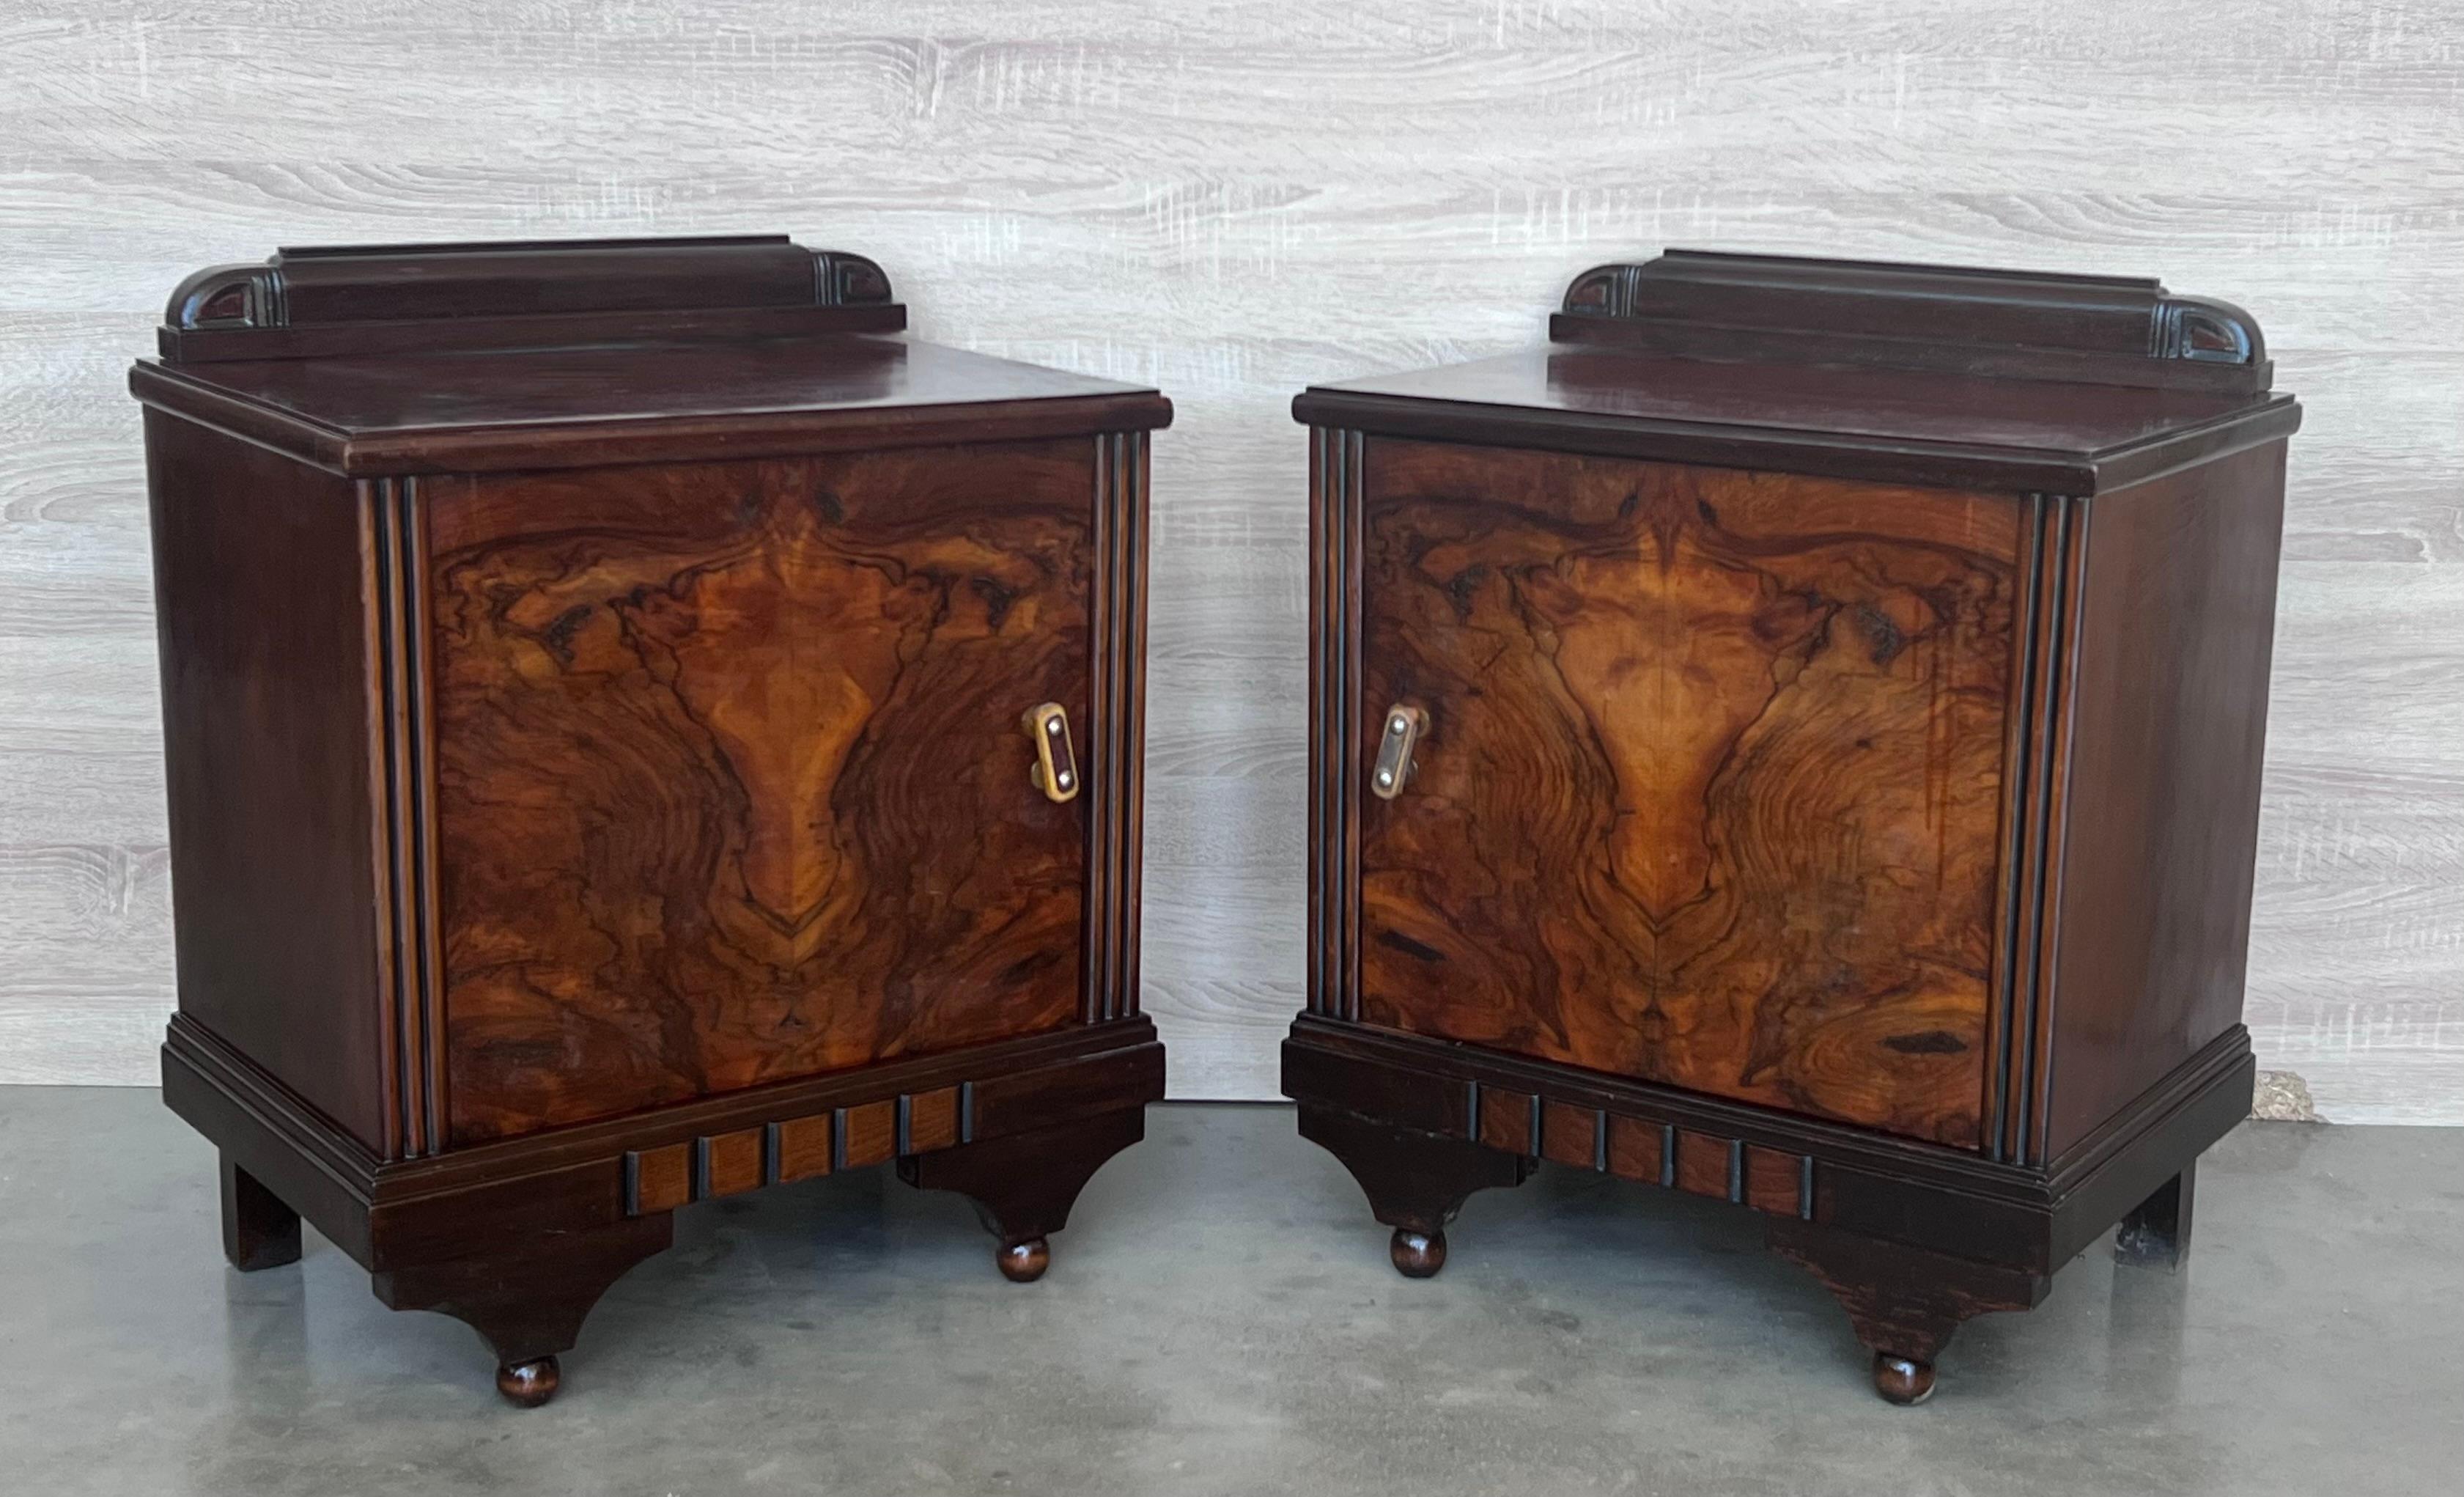 This pair of circa 1930s French Art Deco side cabinets could be used to flank a sofa or as nightstands. Each has a storage compartment and one interior drawer and one ceramic box. Cabinets are set on ebonized trestle foot at the front.
 
Height to